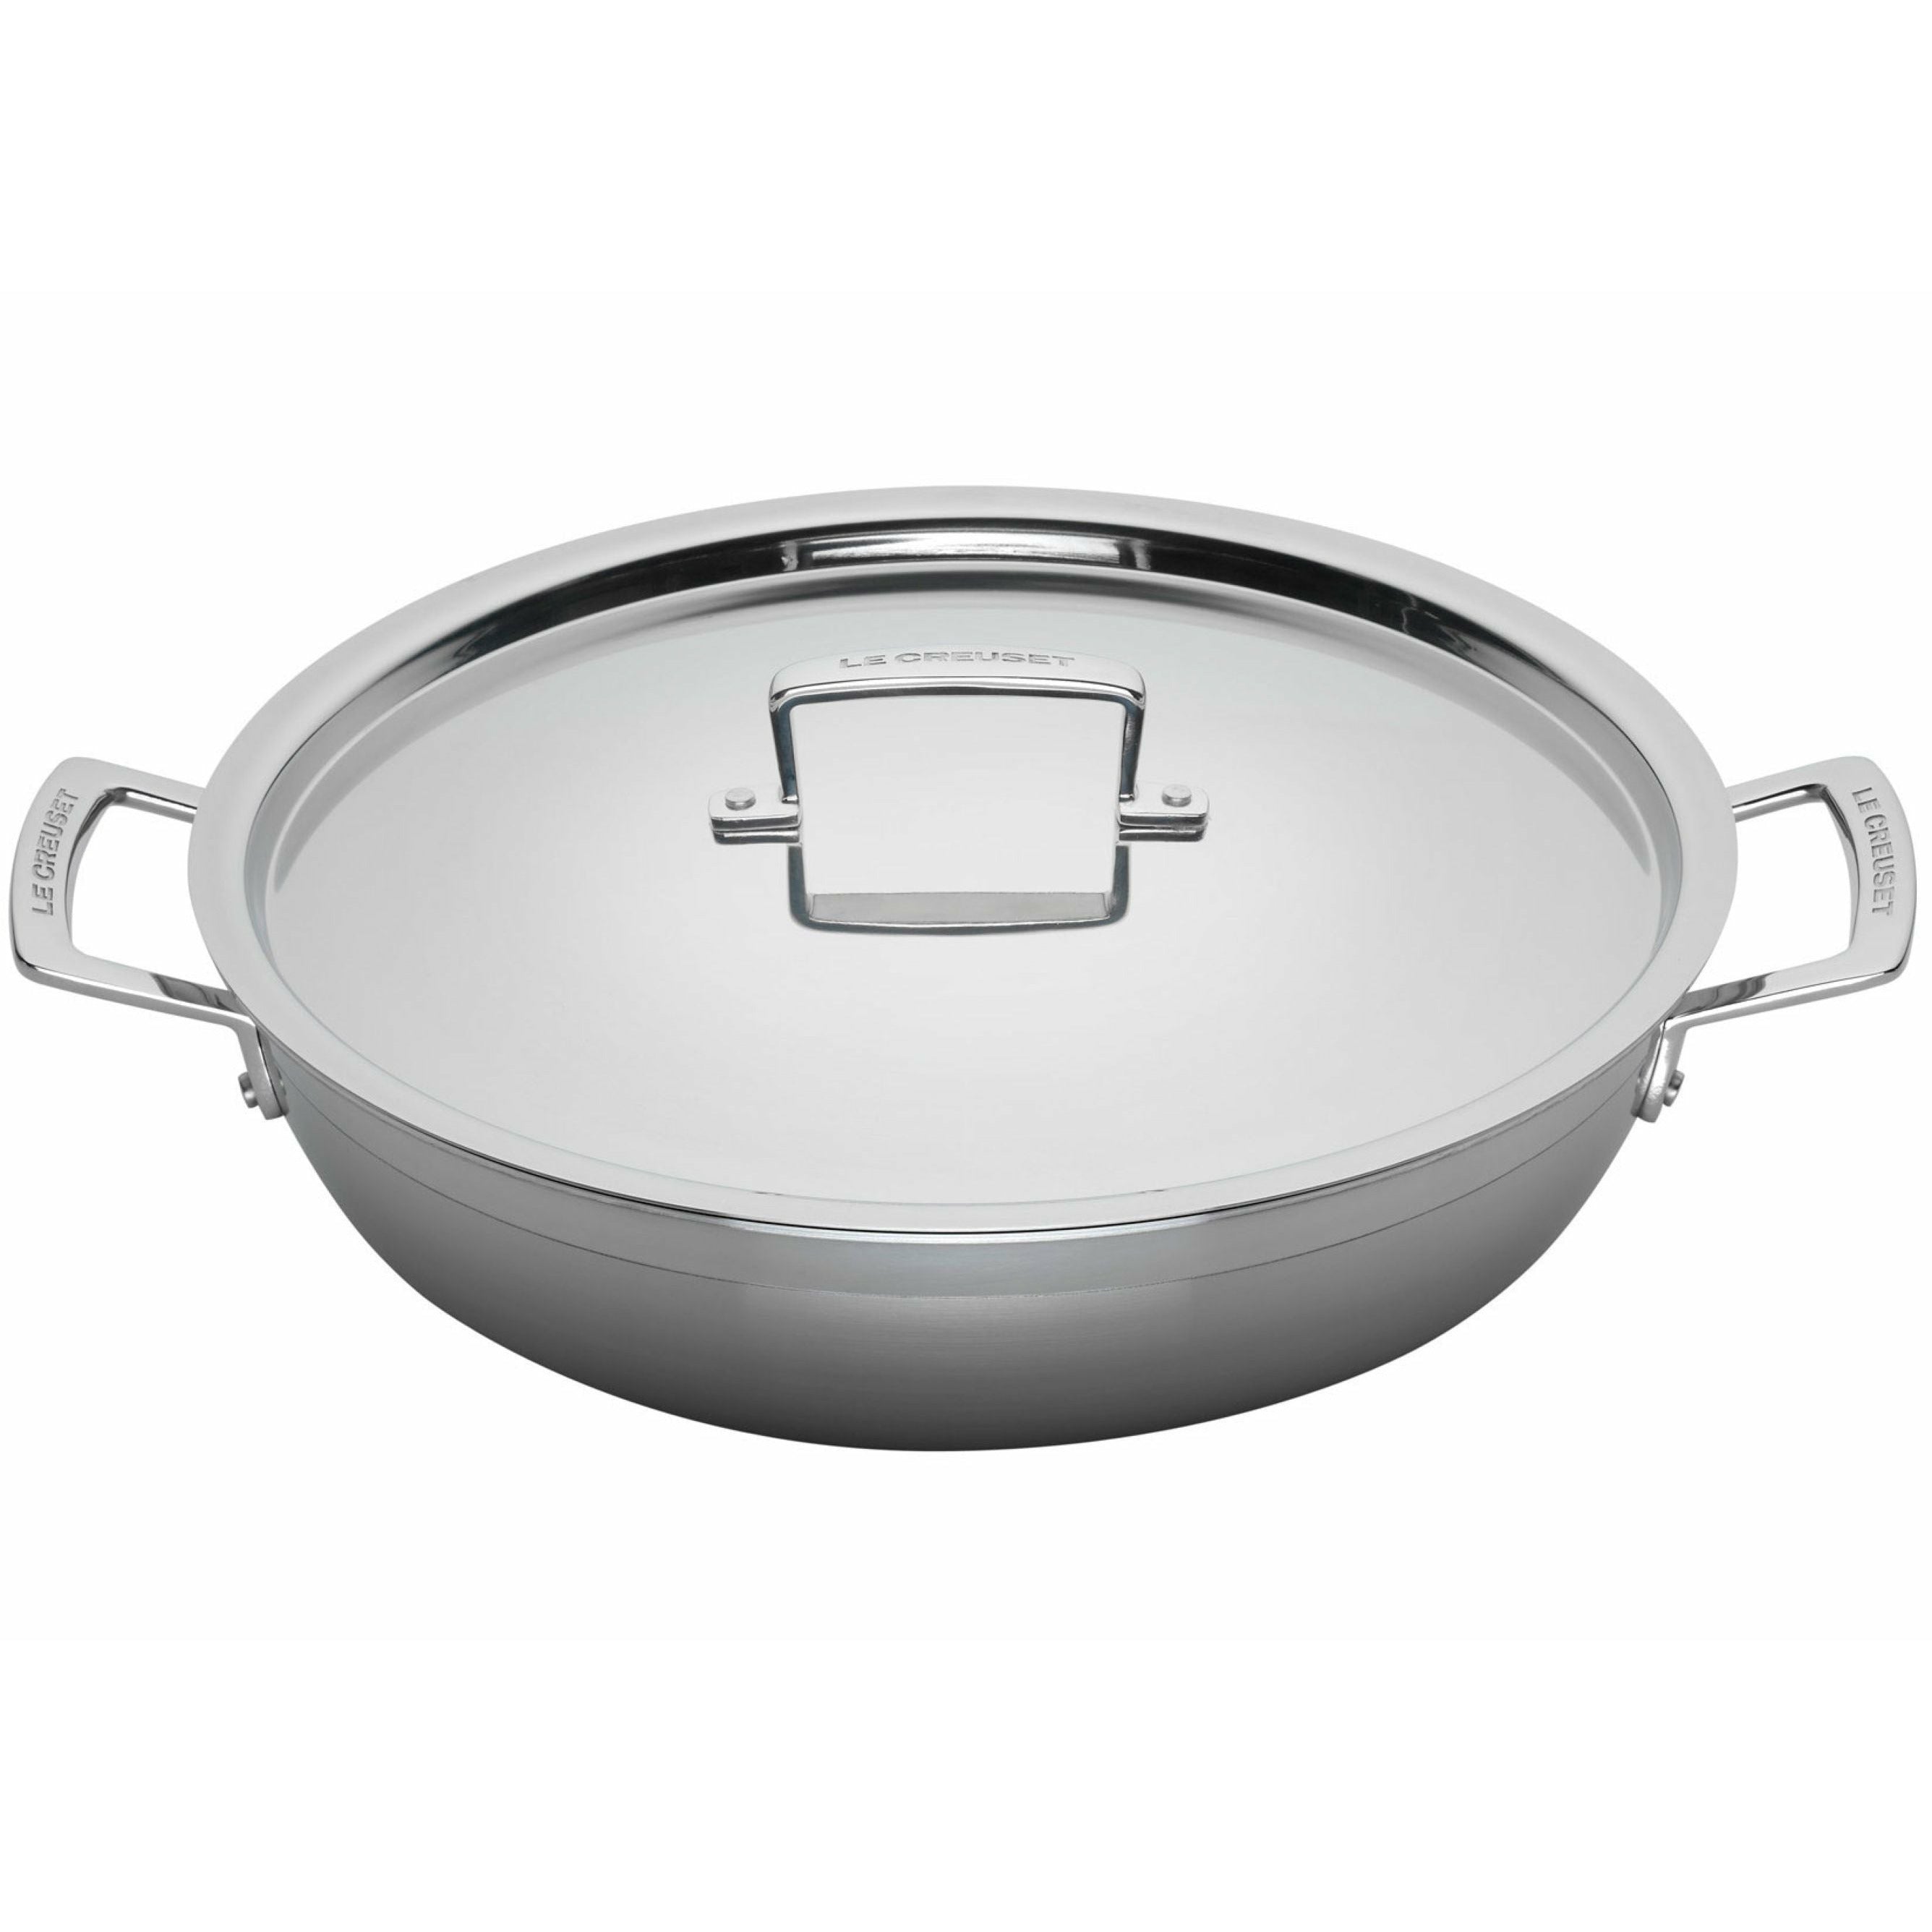 Le Creuset 3 Ply Stainless Steel Shallow Casserole With Lid 4.8 L, 30 Cm